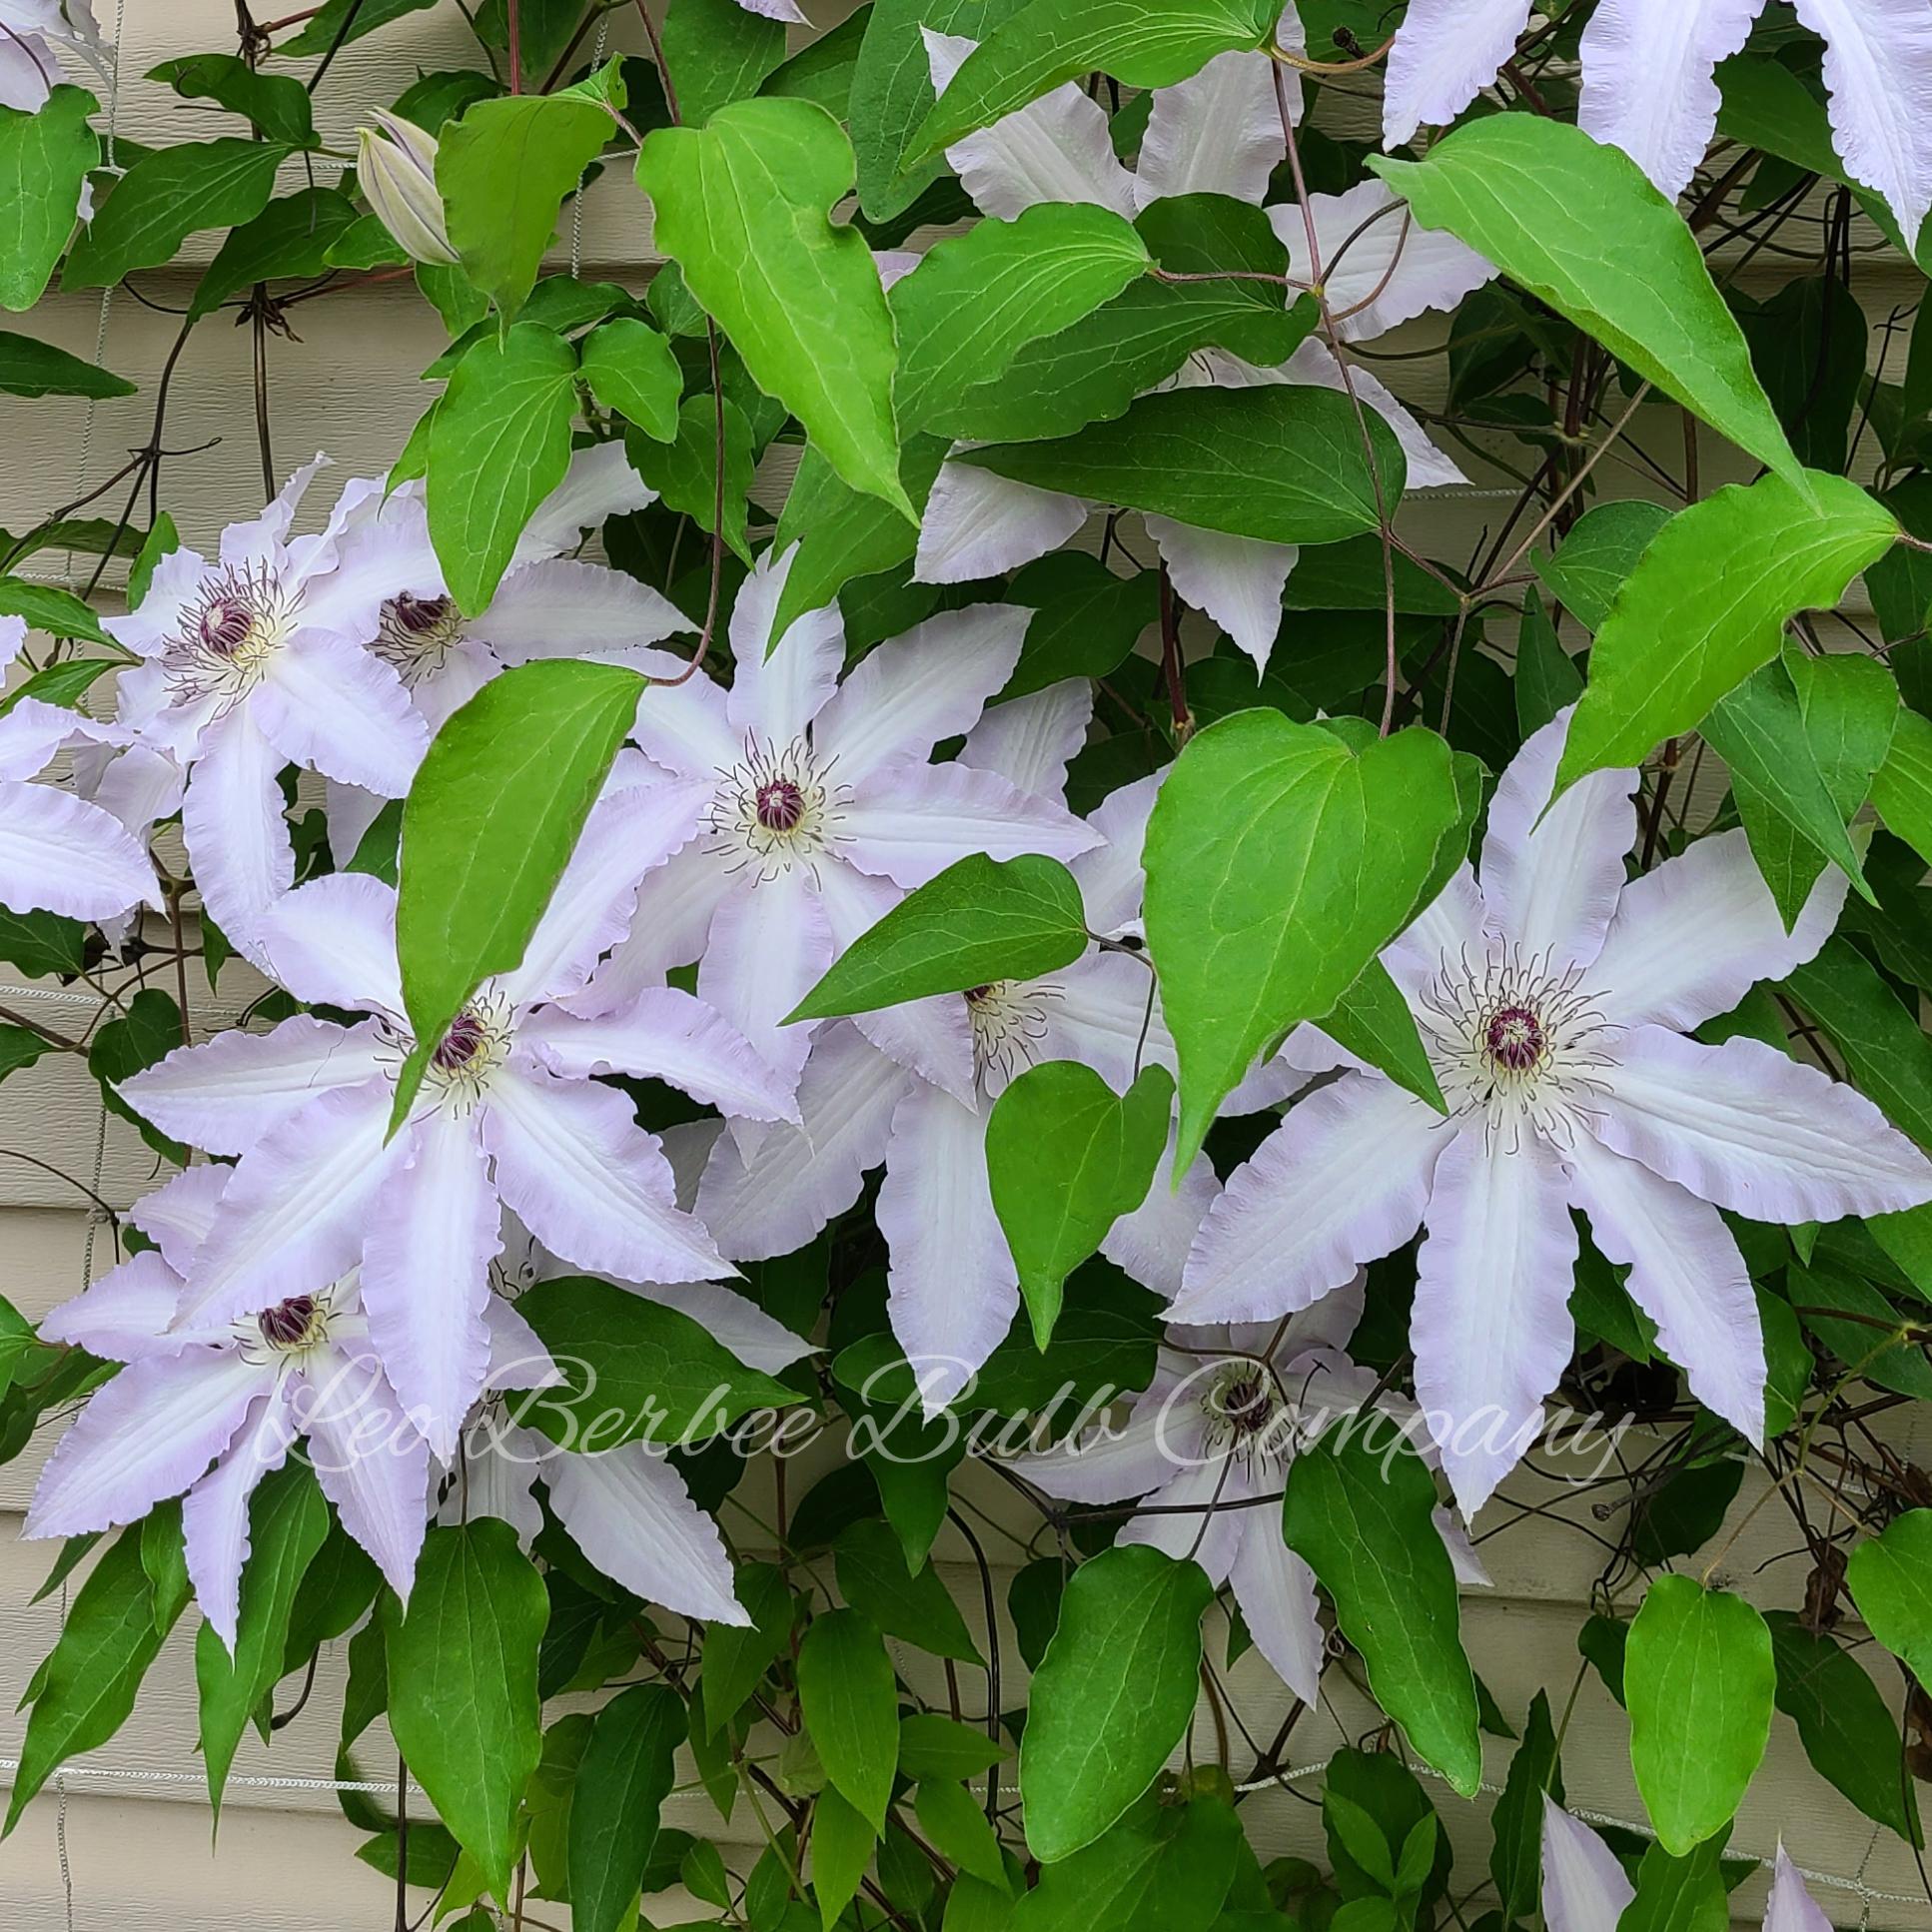 Clematis Claire de Lune from Leo Berbee Bulb Company